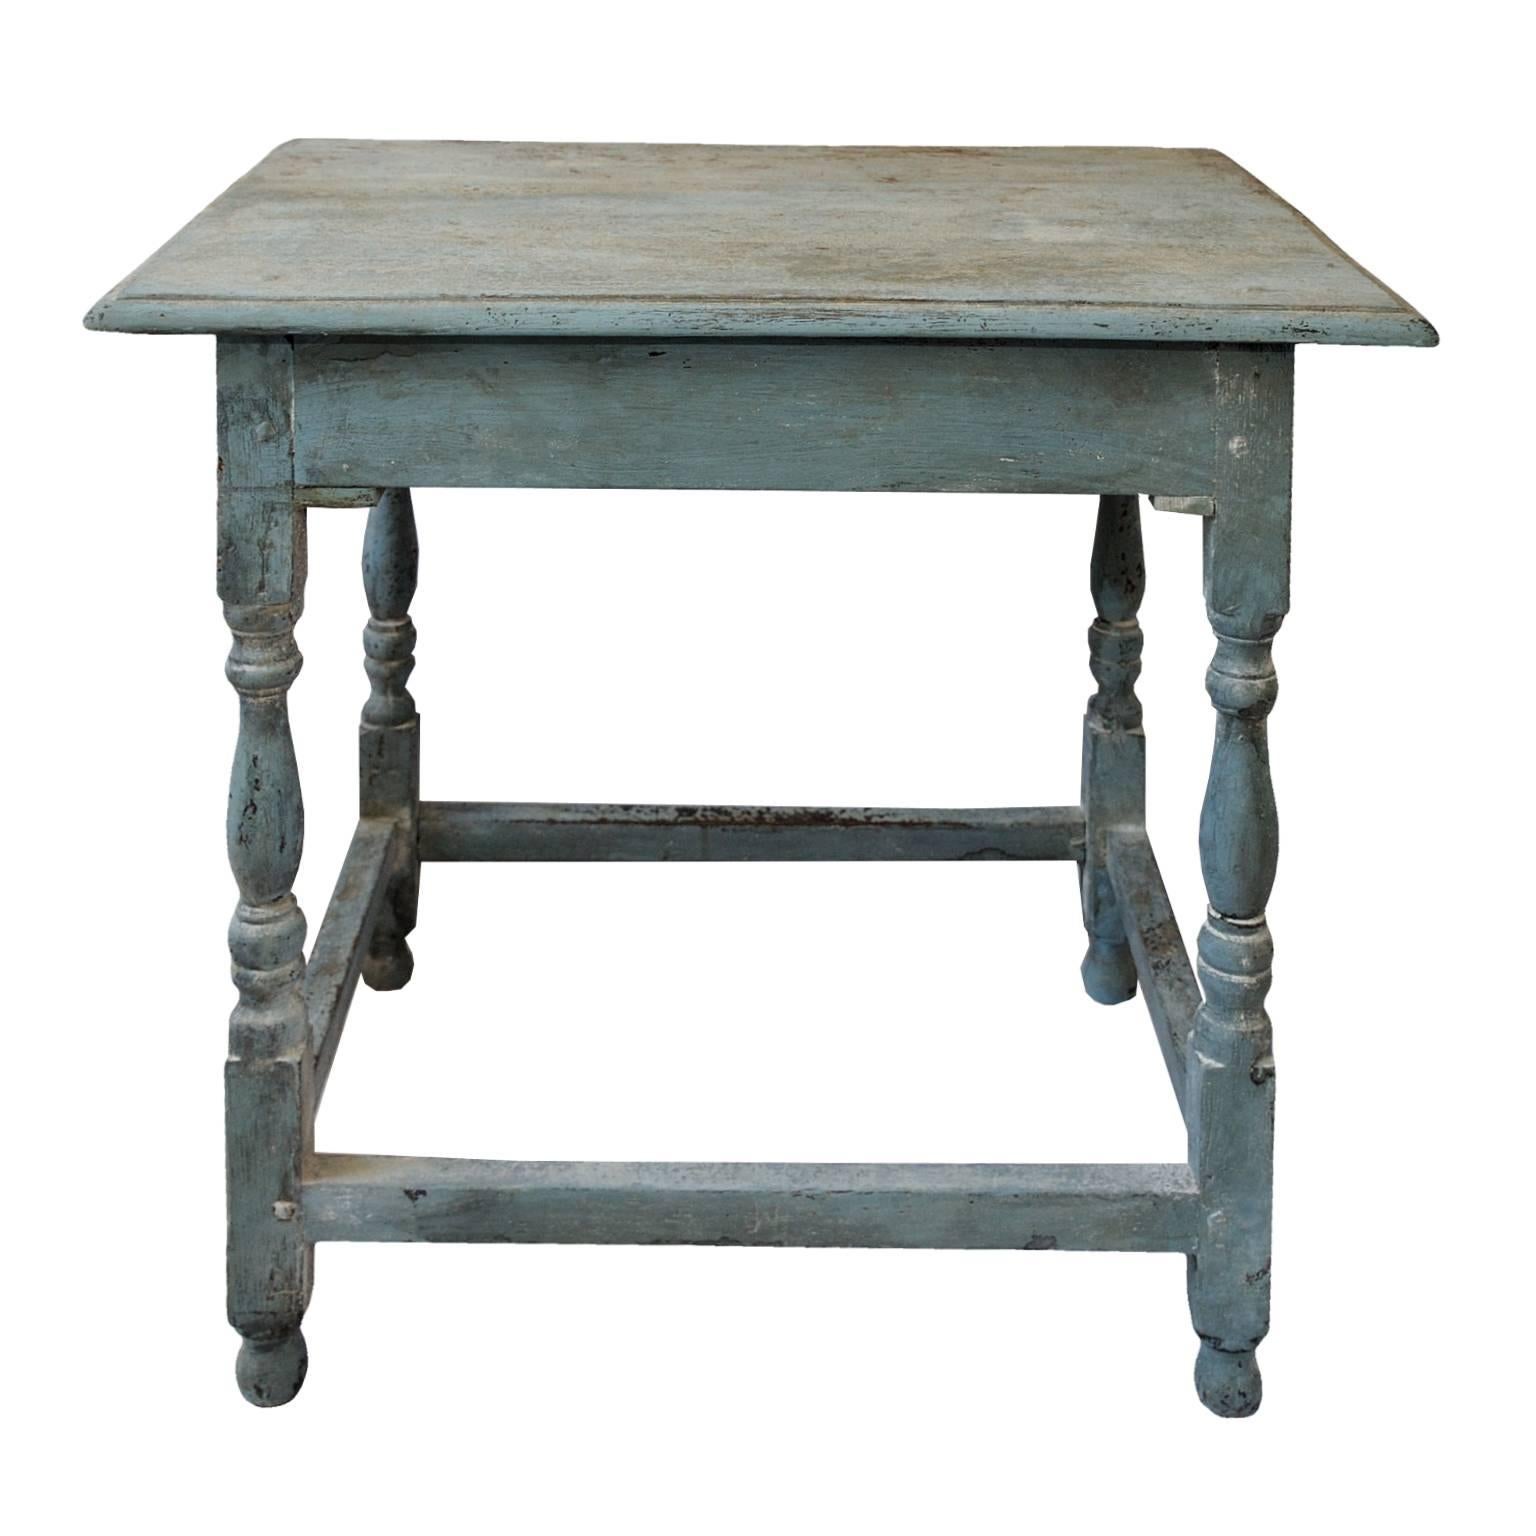 Hand-Painted English Mid-18th Century George II Painted Side Table, circa 1740 For Sale